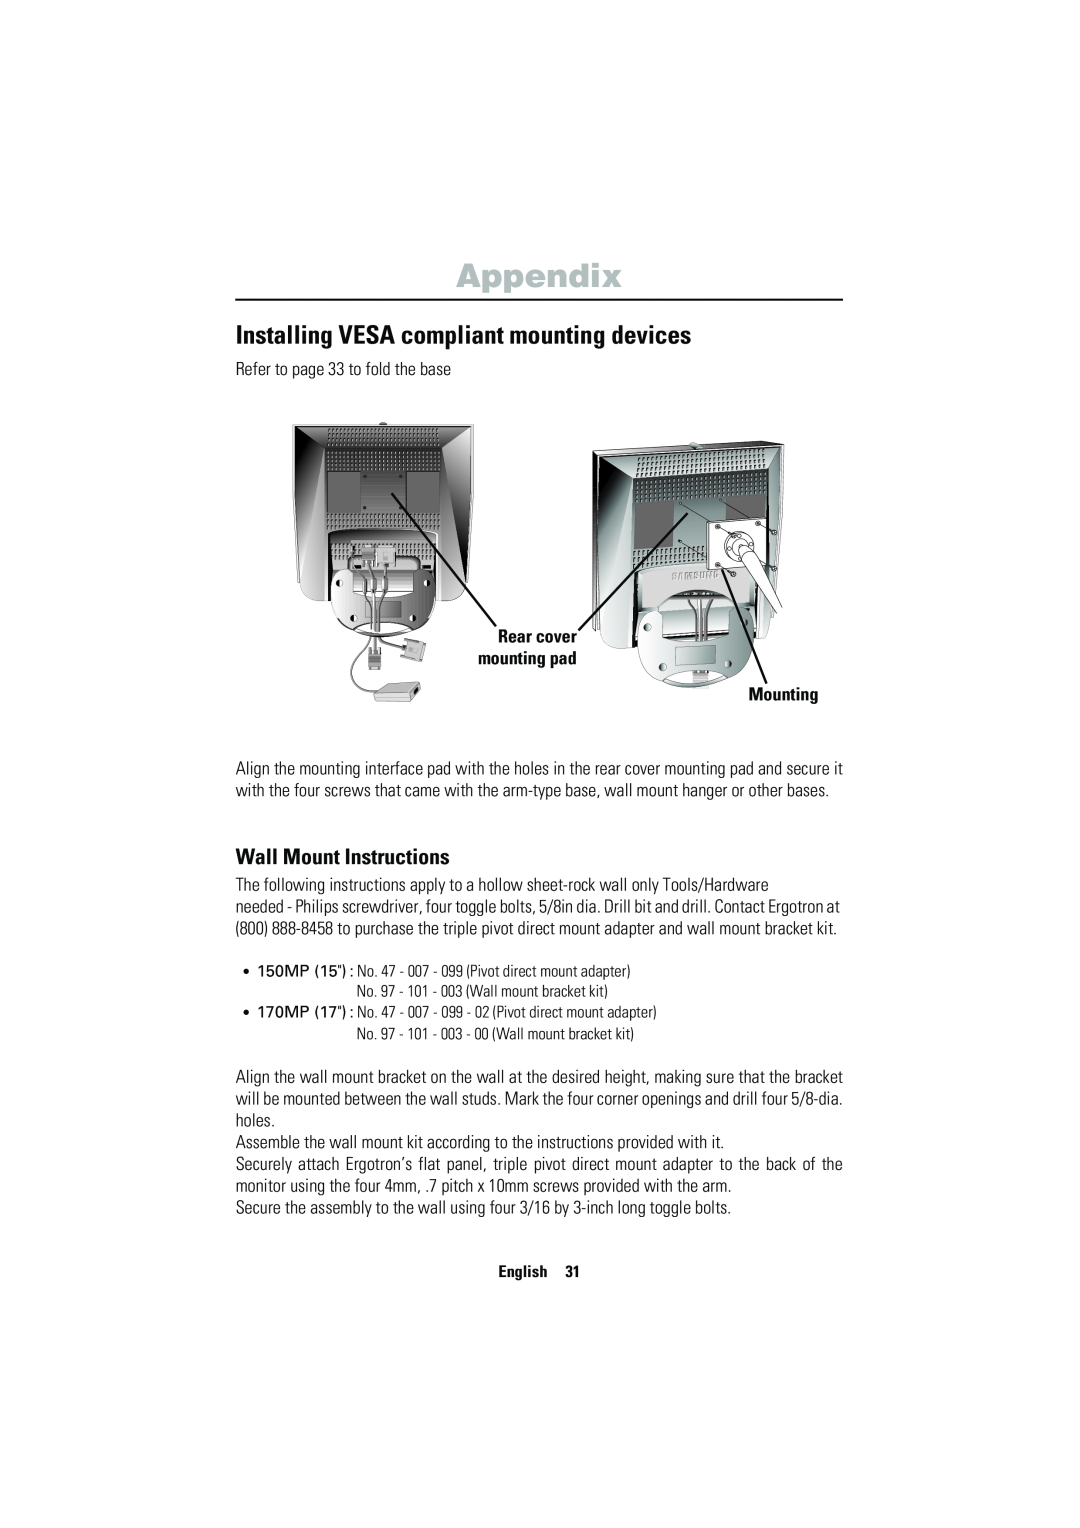 Samsung 150MP manual Installing VESA compliant mounting devices, Wall Mount Instructions, Mounting, Appendix 